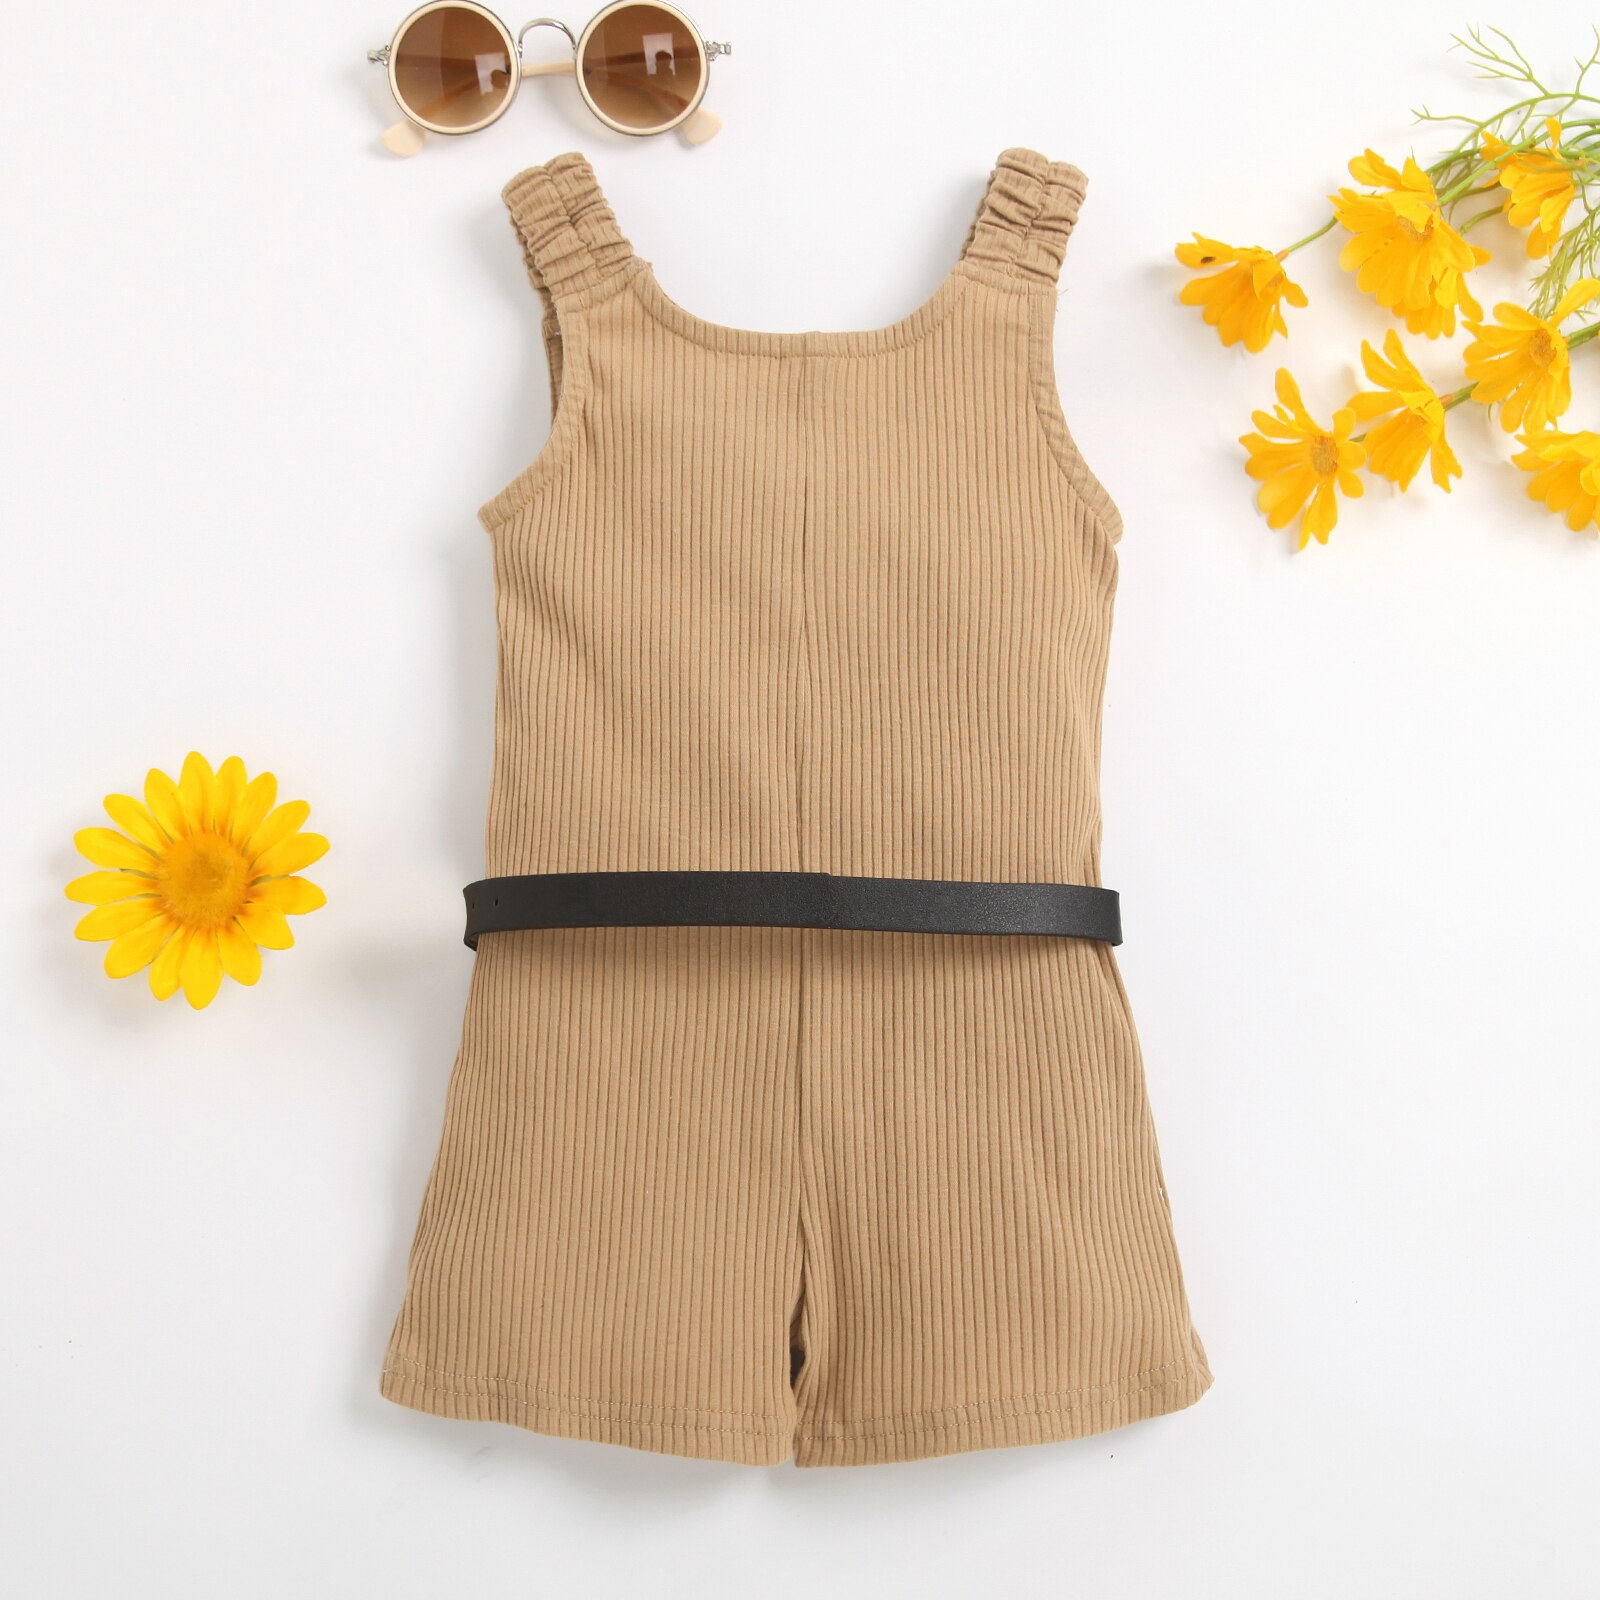 Infant-Kids-Baby-Girl-s-Jumpsuit-Set-Wide-Strap-Sleeveless-Ribbed-Short-Playsuit-Ribbed-Jumpsuit-Waist-4